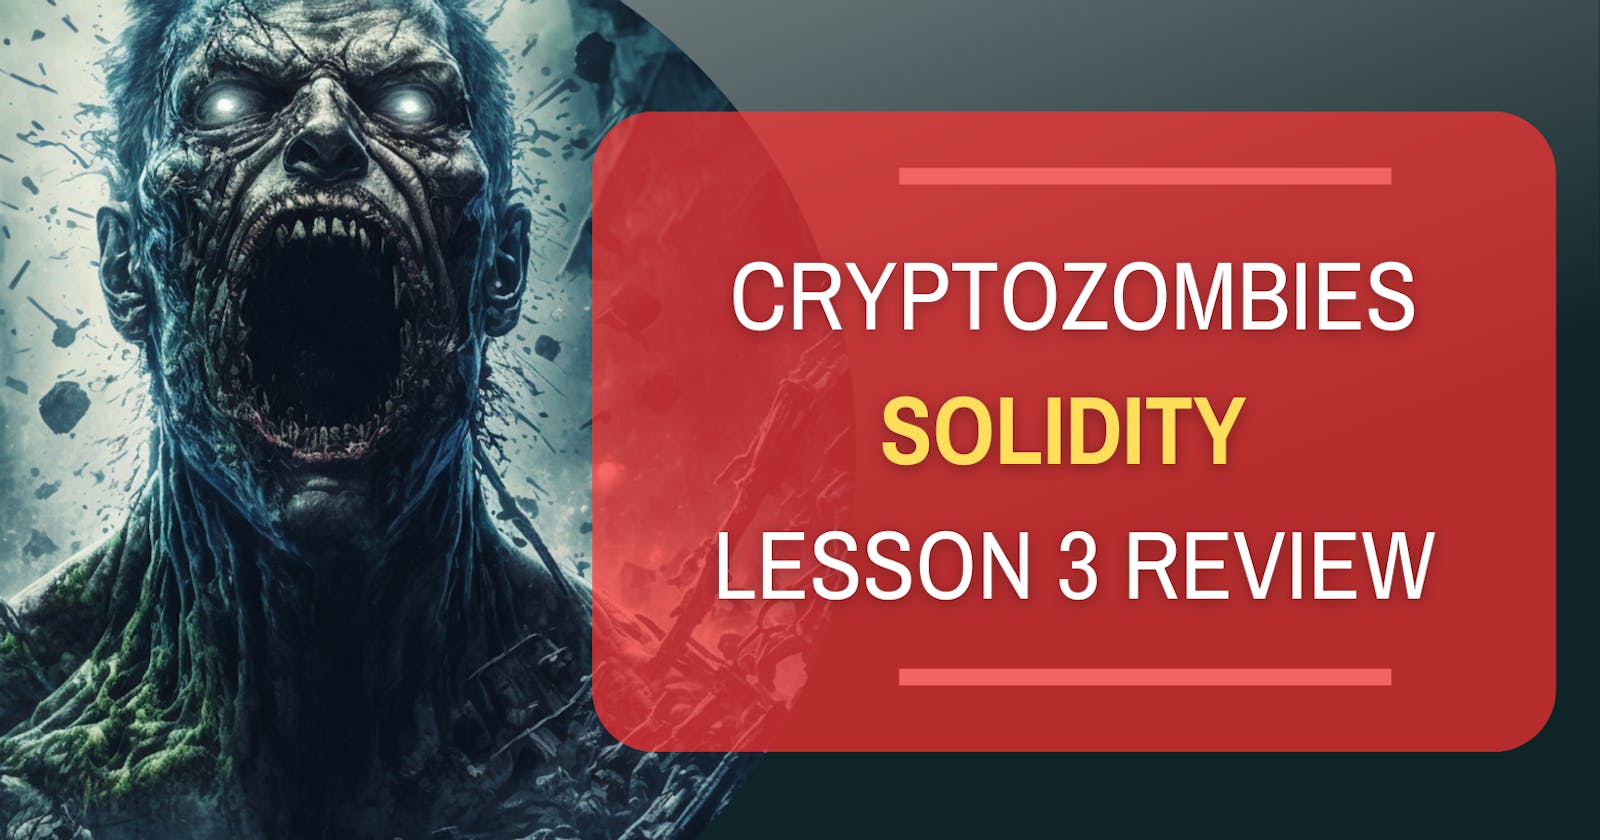 CryptoZombies: Lesson 3 Review